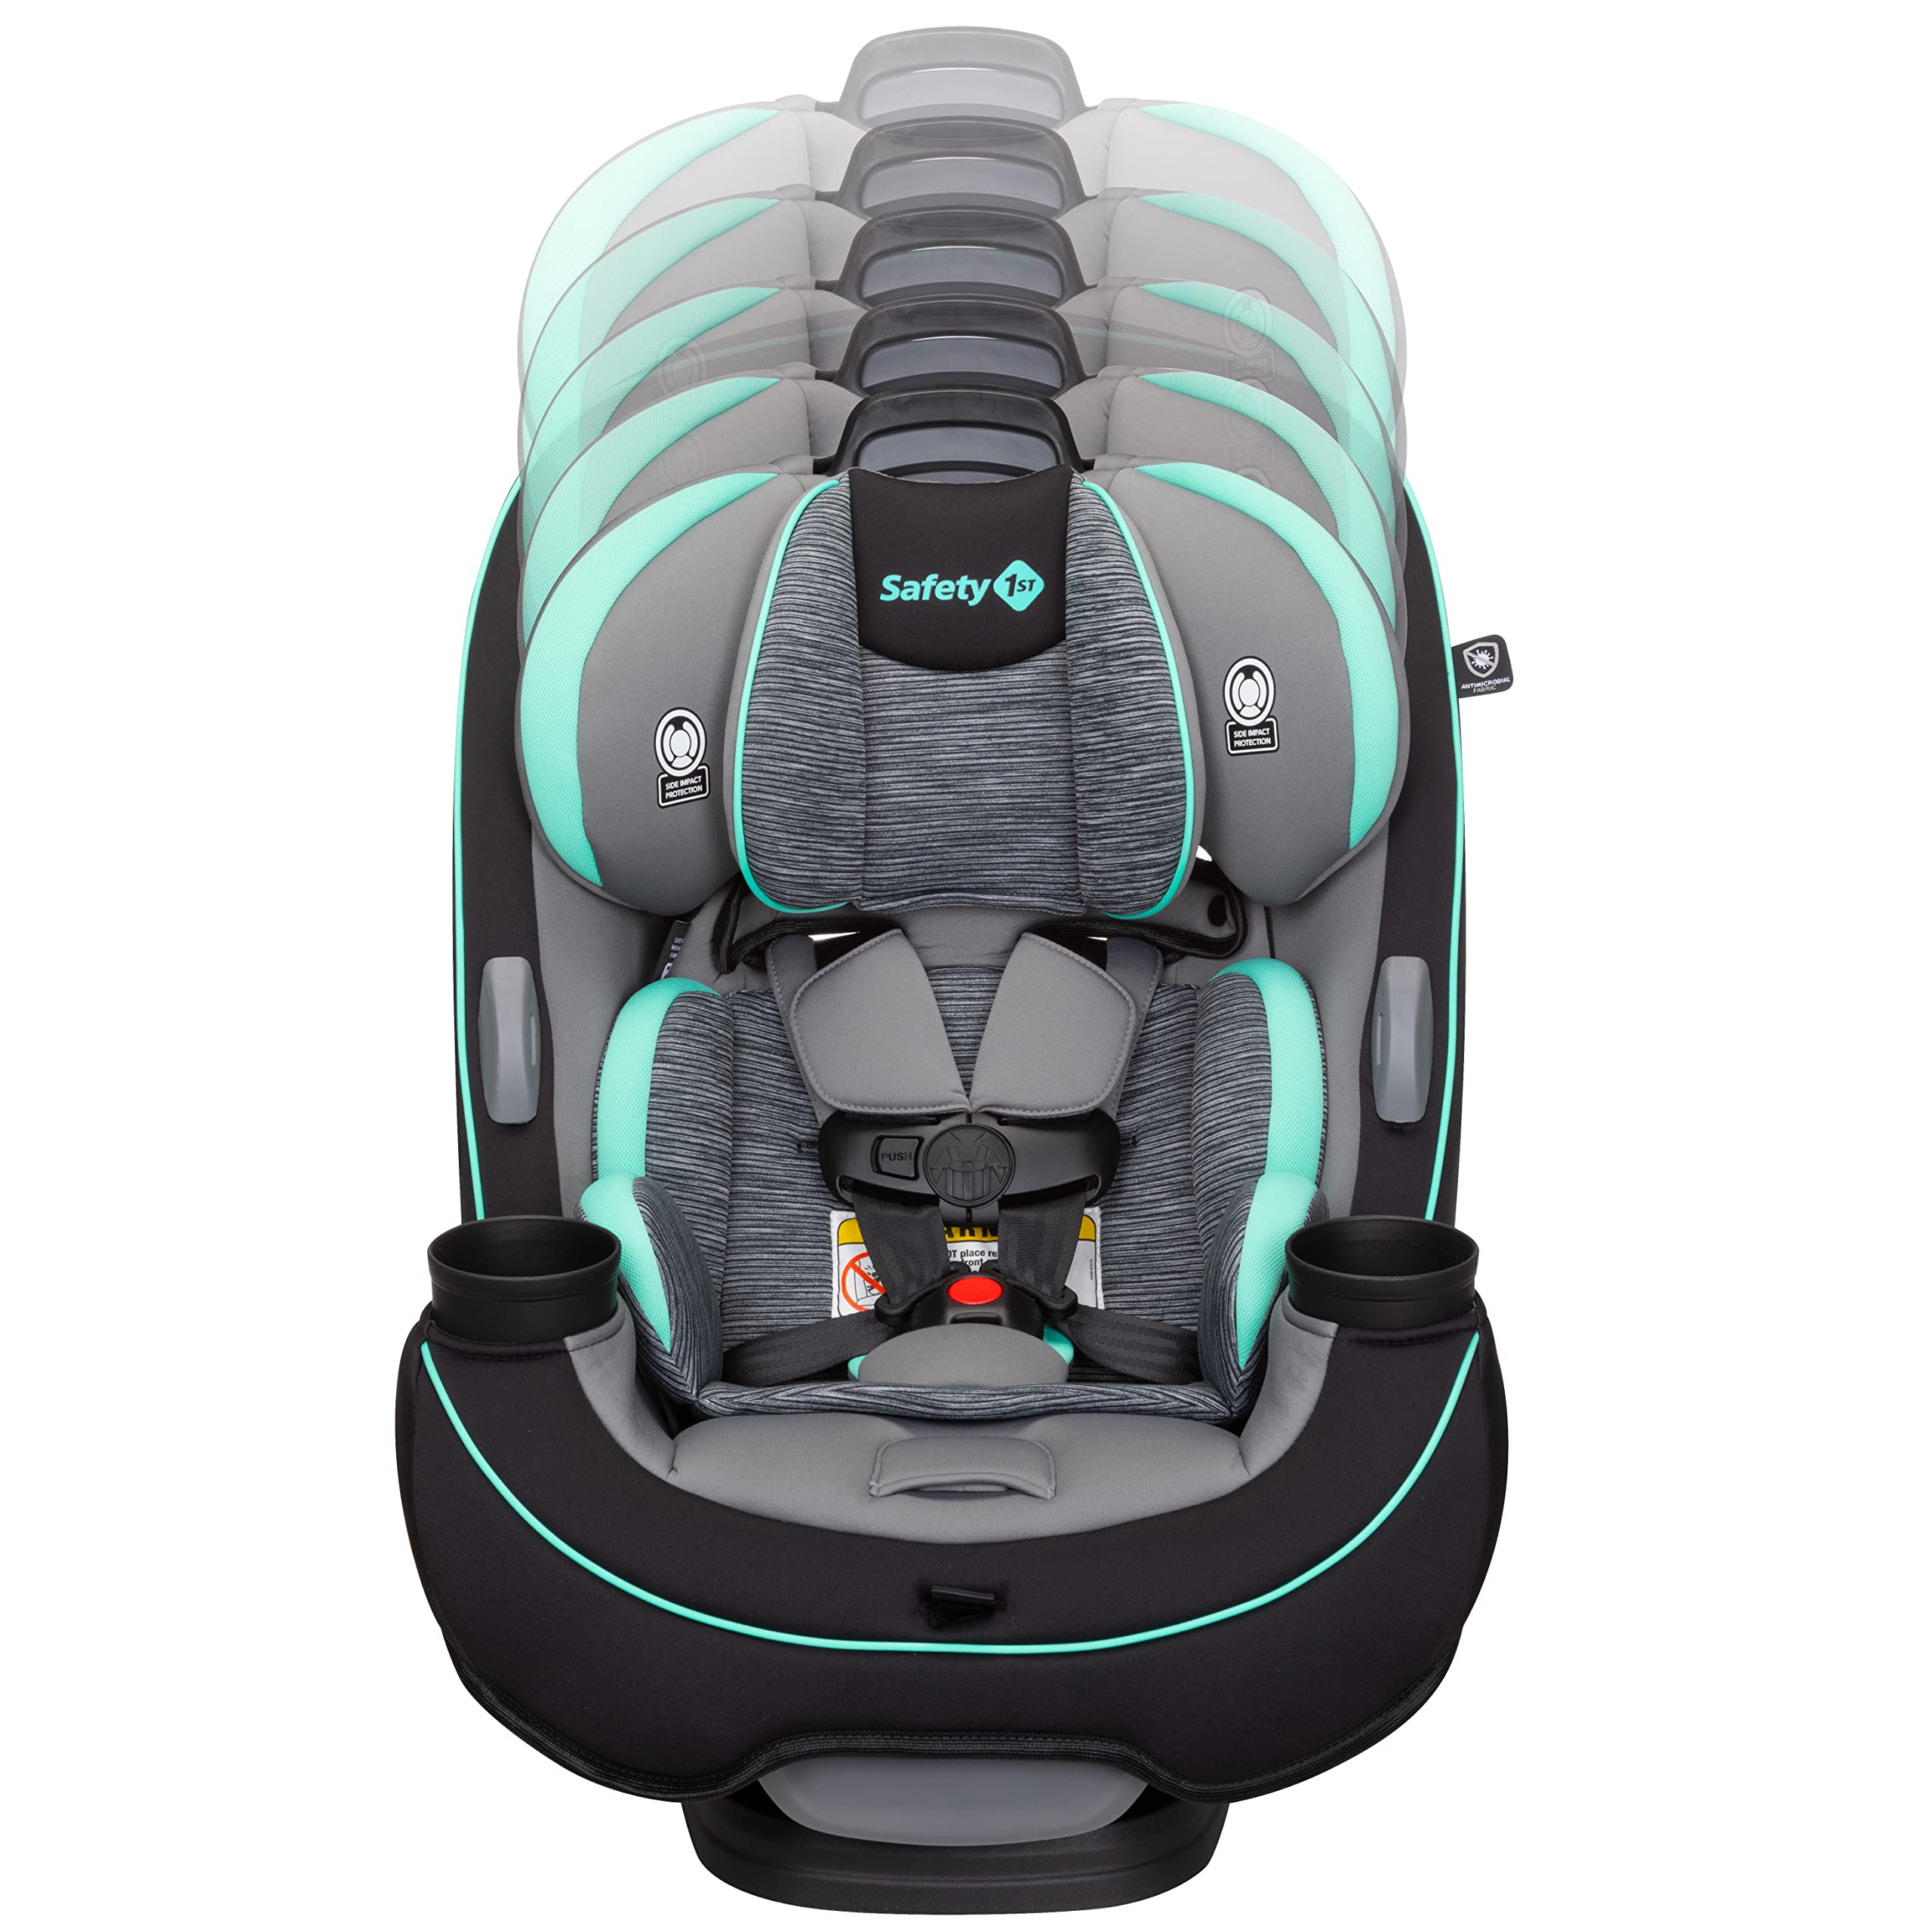 Safety 1st Grow and Go All-in-One Convertible Car Seat, Rear-facing 5-40 pounds, Forward-facing 22-65 pounds, and Belt-positioning booster 40-100 pounds, Aqua Pop, 1 Count (Pack of 1)